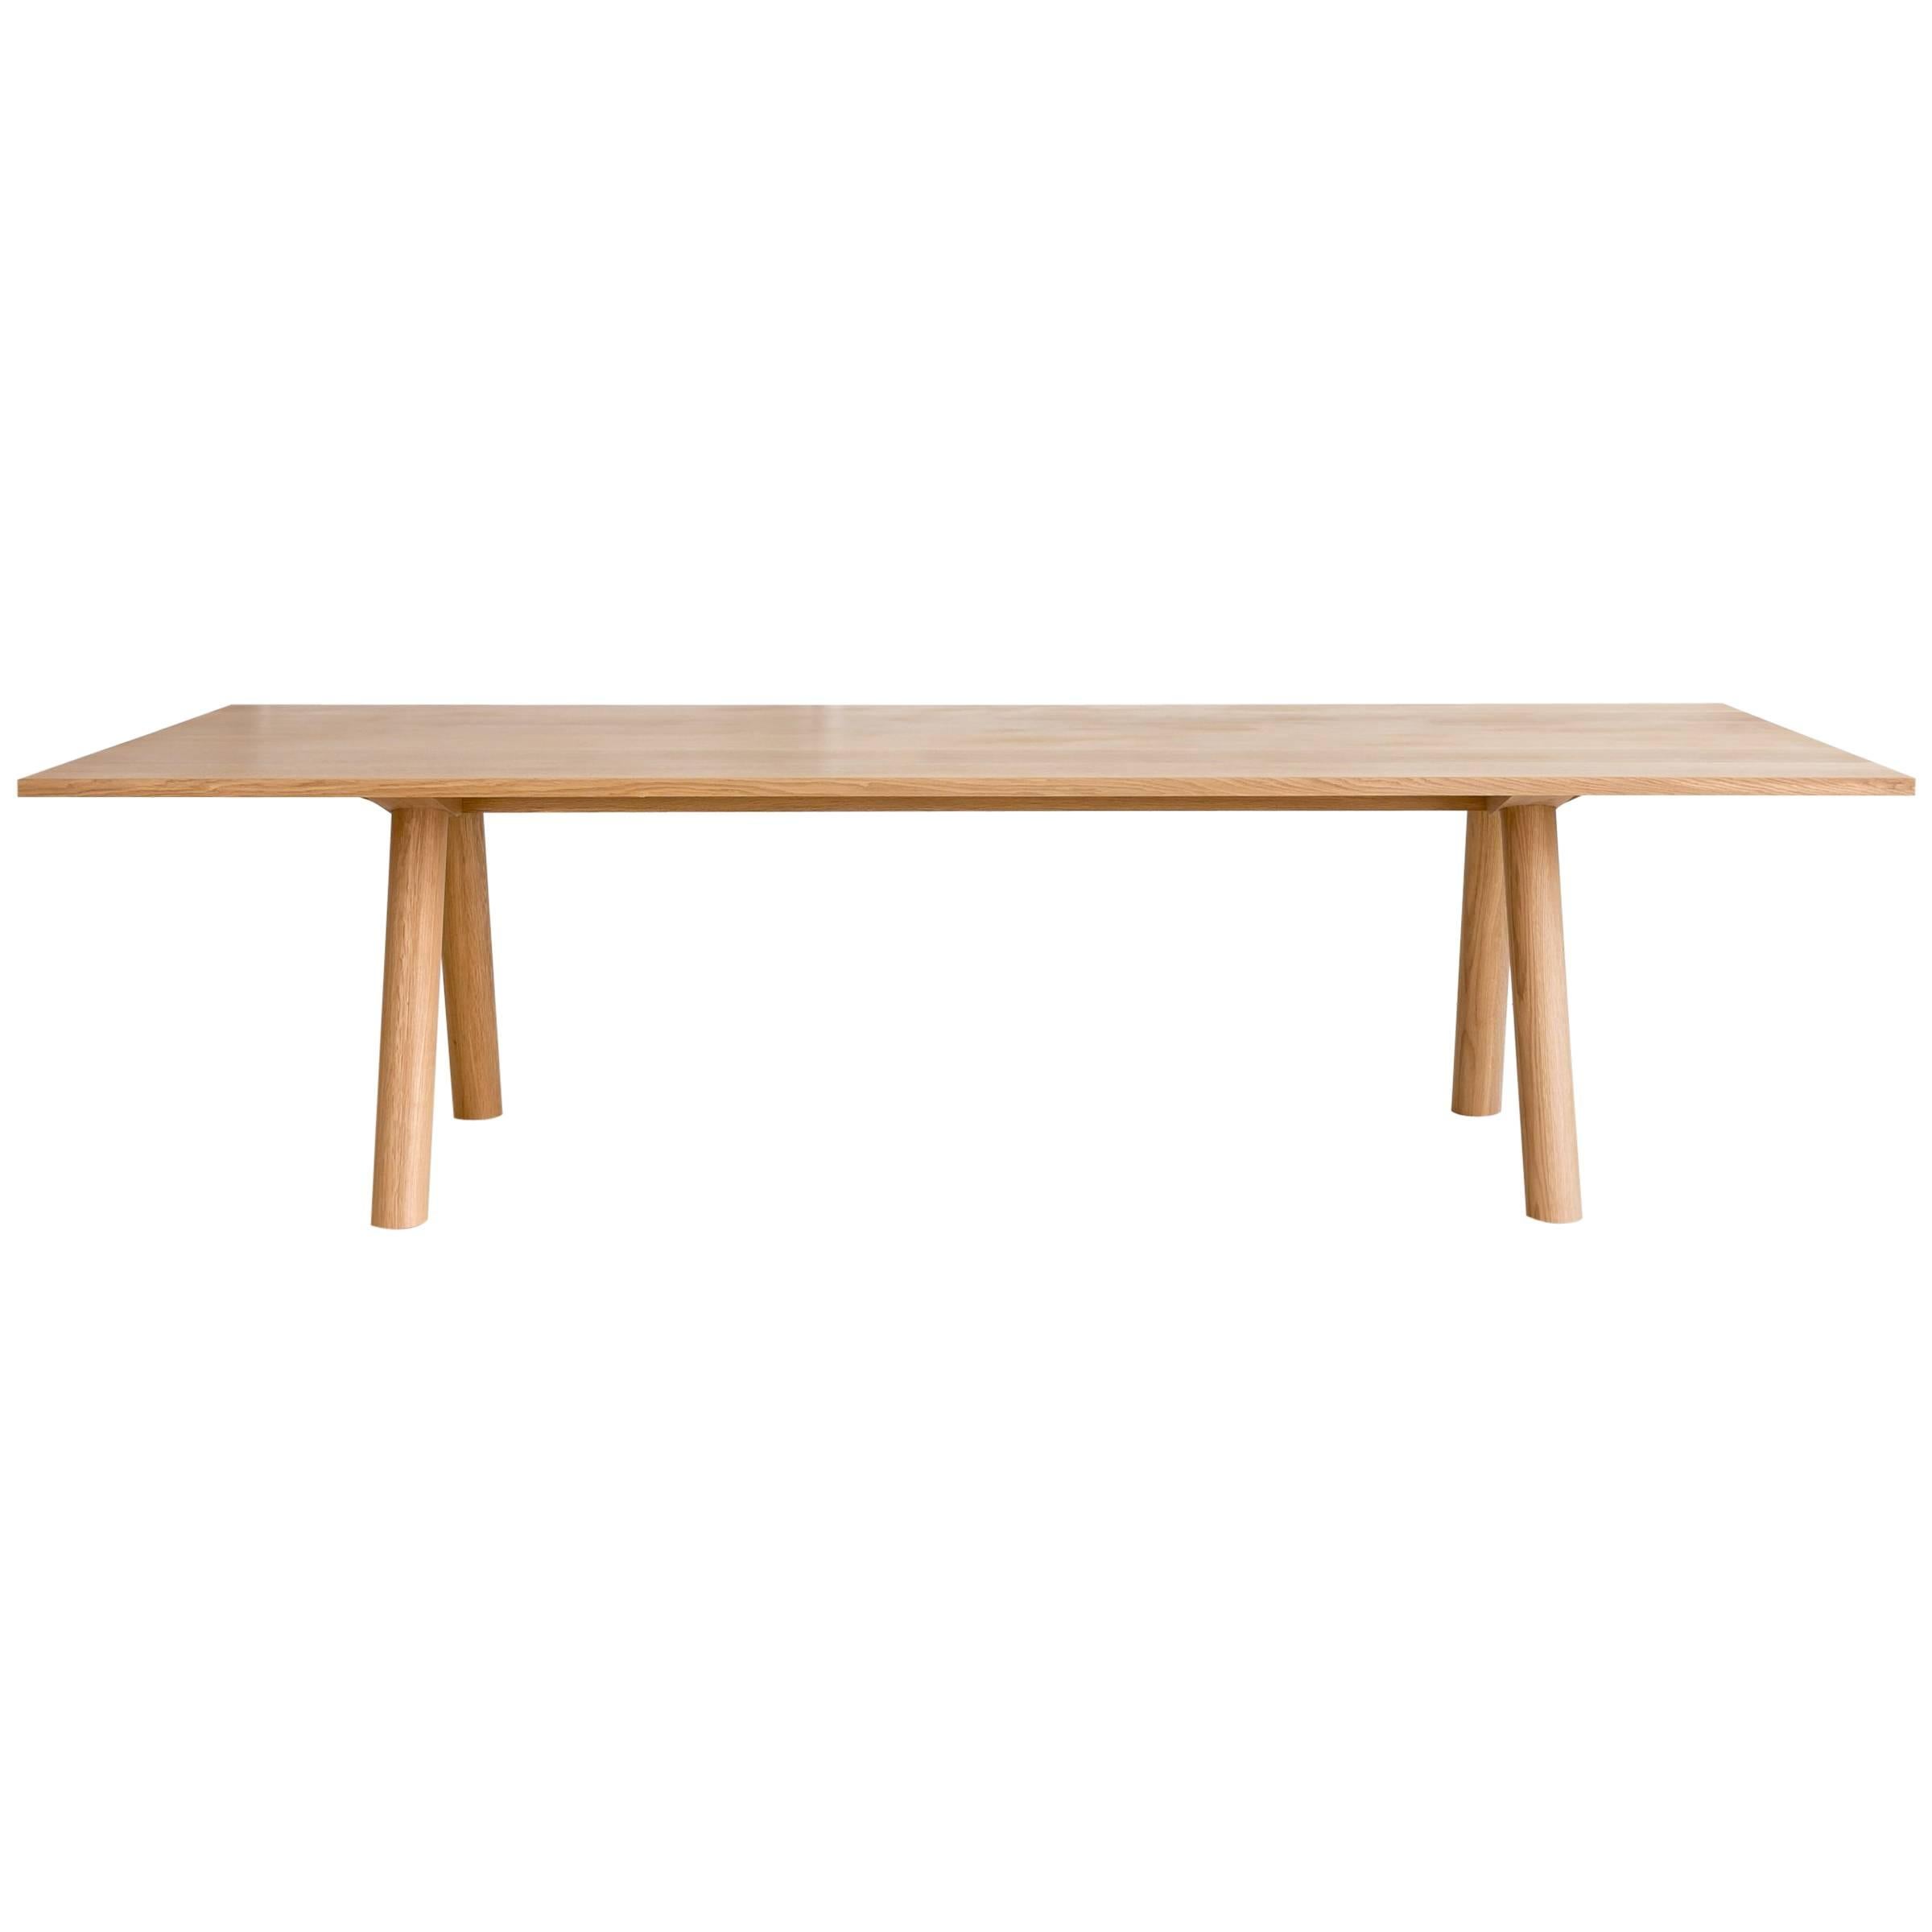 Contemporary Wood Angled Leg Column Dining Table in White Oak by Fort Standard